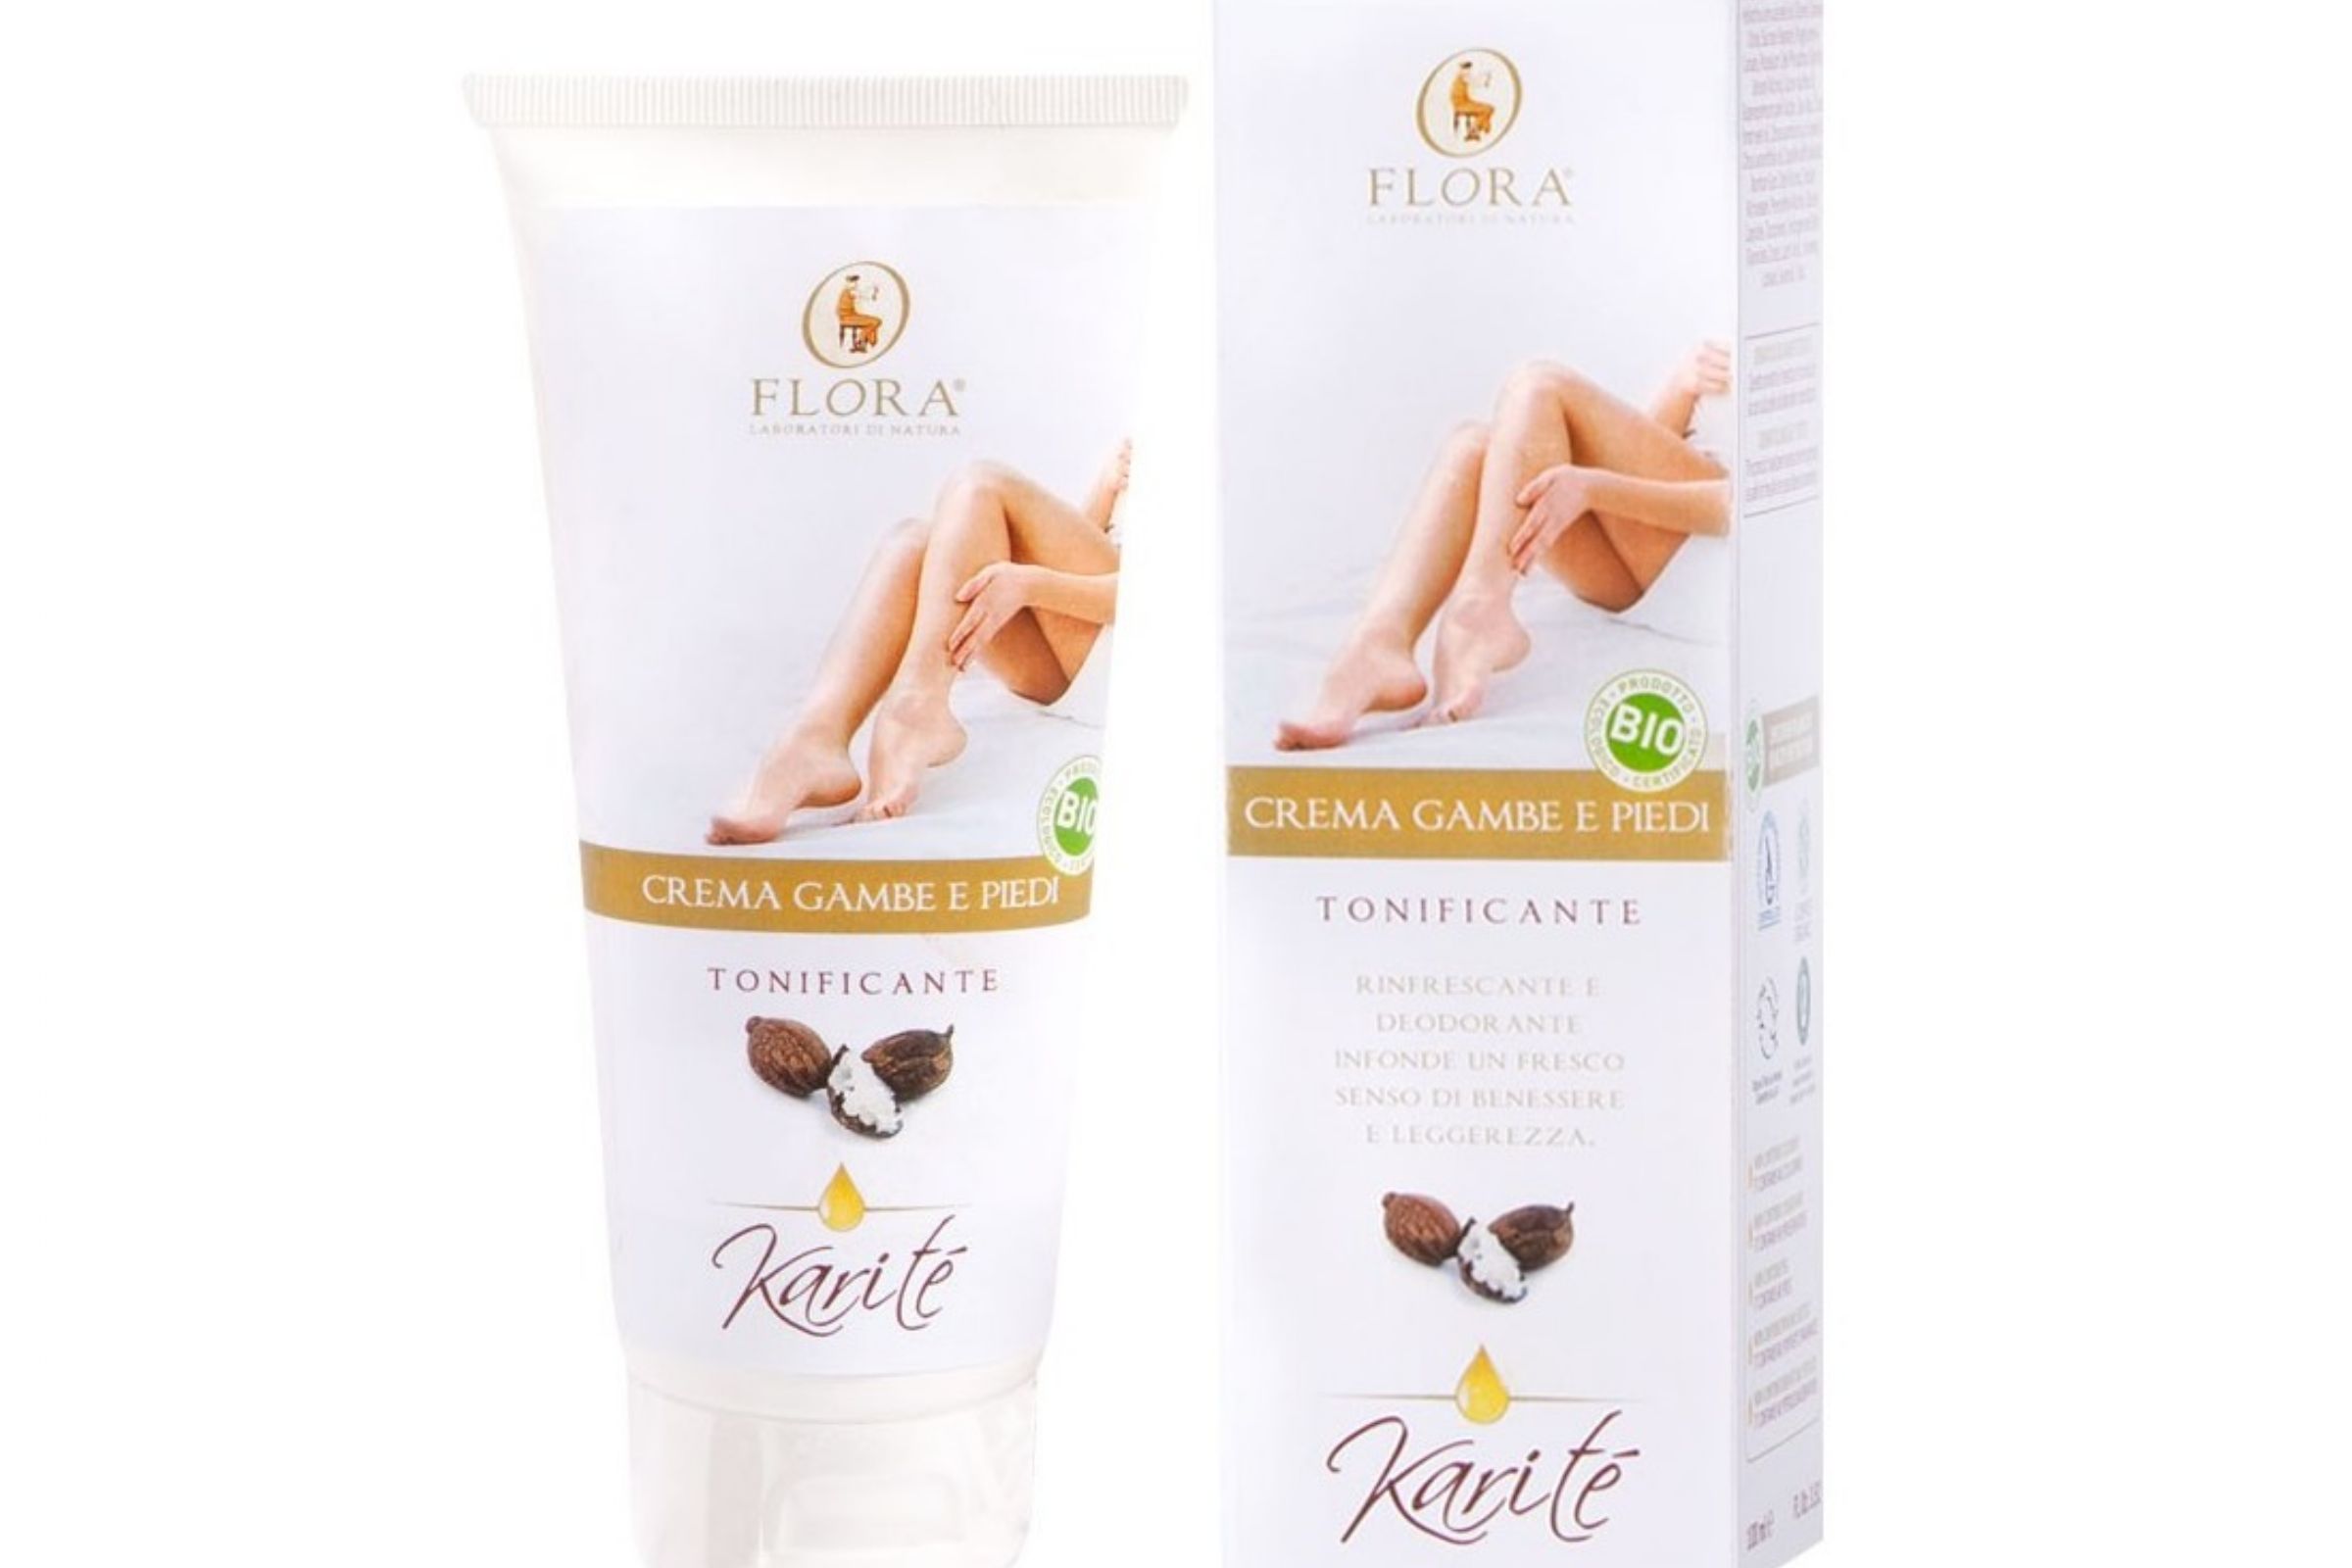 Body, Legs and Feet Lotion